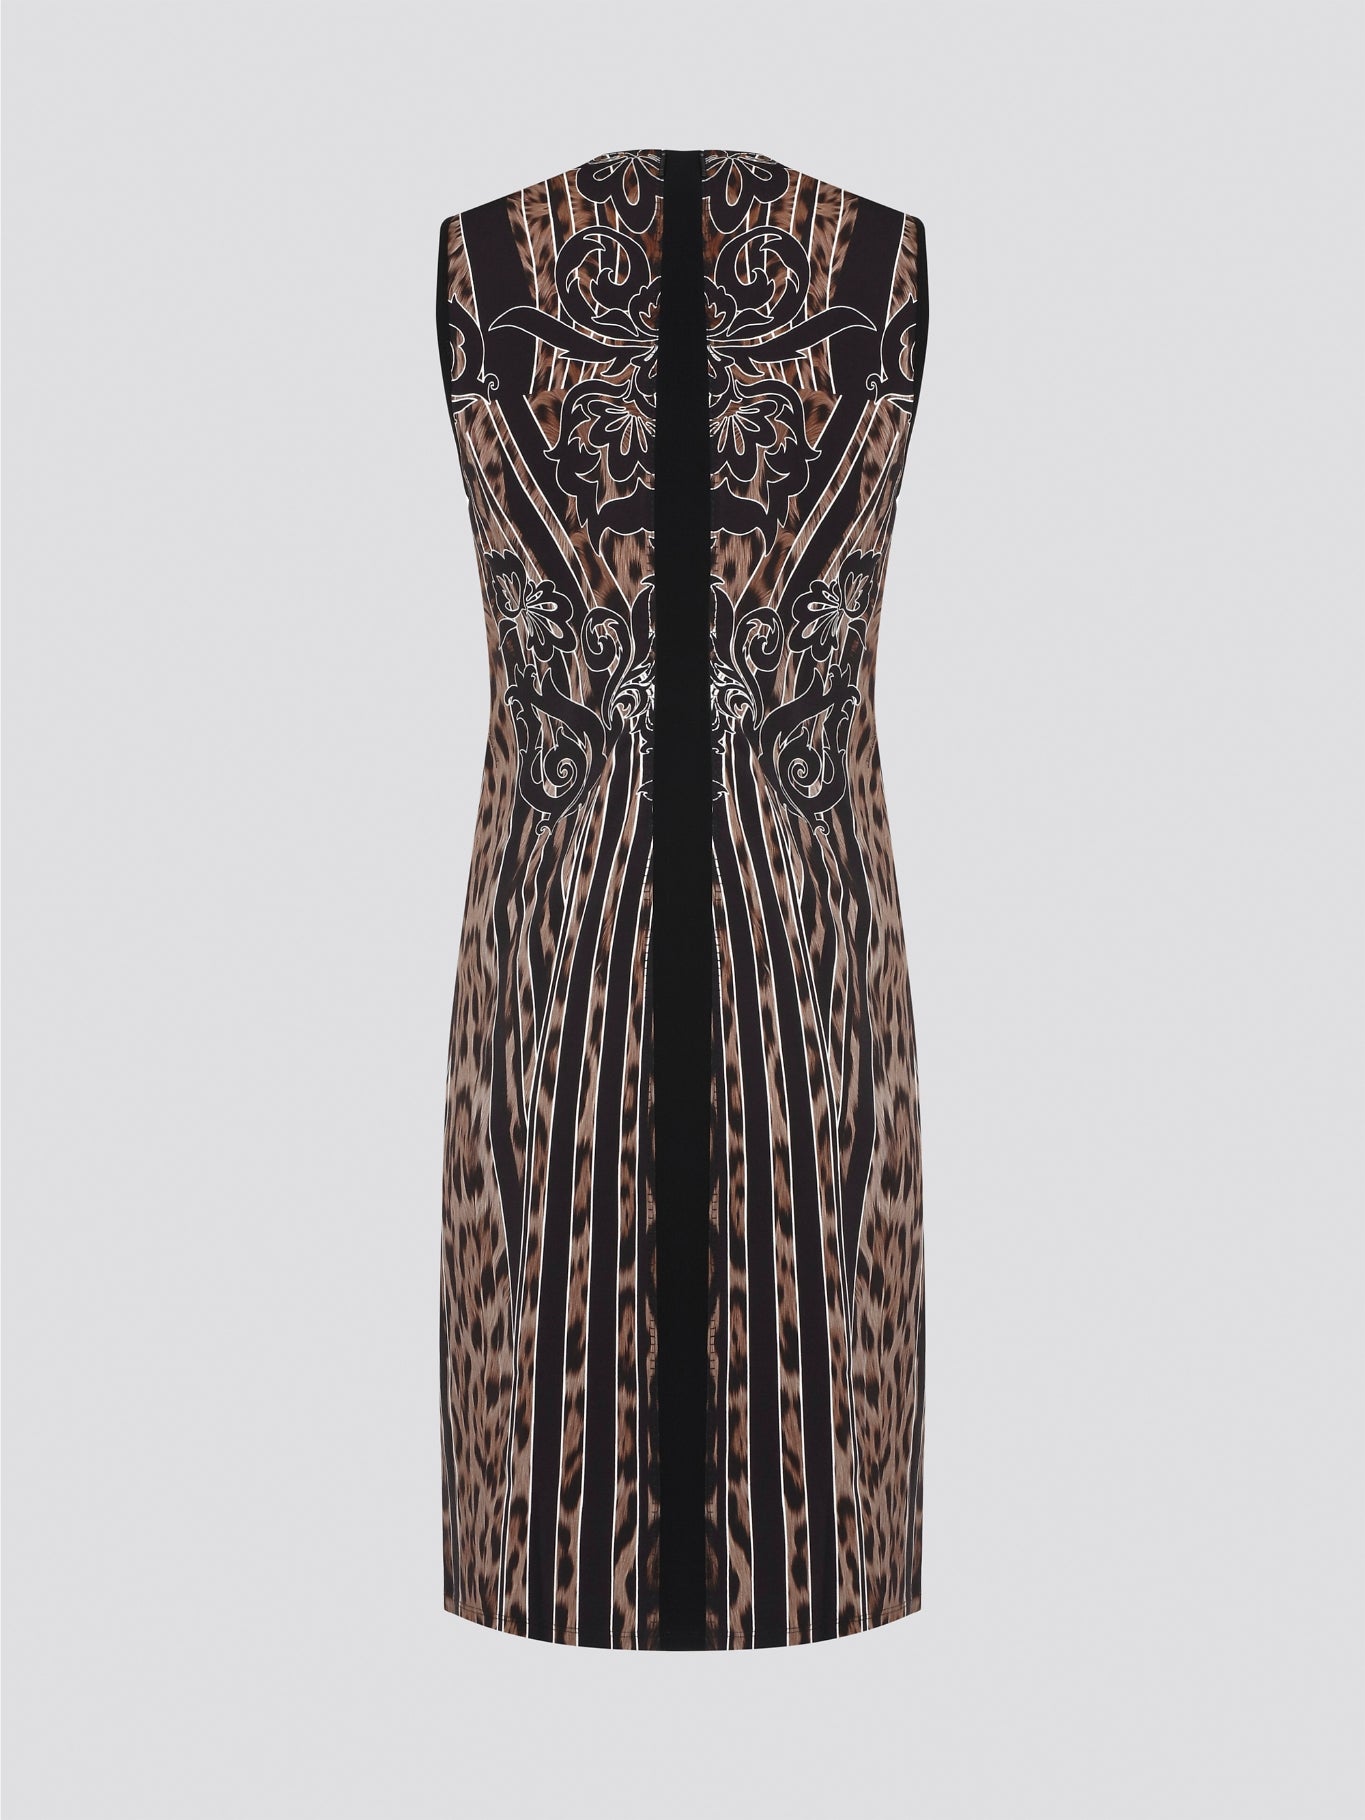 Fade into the wild with the Roberto Cavalli Leopard Print Sheath Dress. This fierce and fabulous statement piece will turn heads wherever you go, exuding confidence and sophistication. Embrace your inner predator and unleash your stylish prowess with this bold and daring dress.